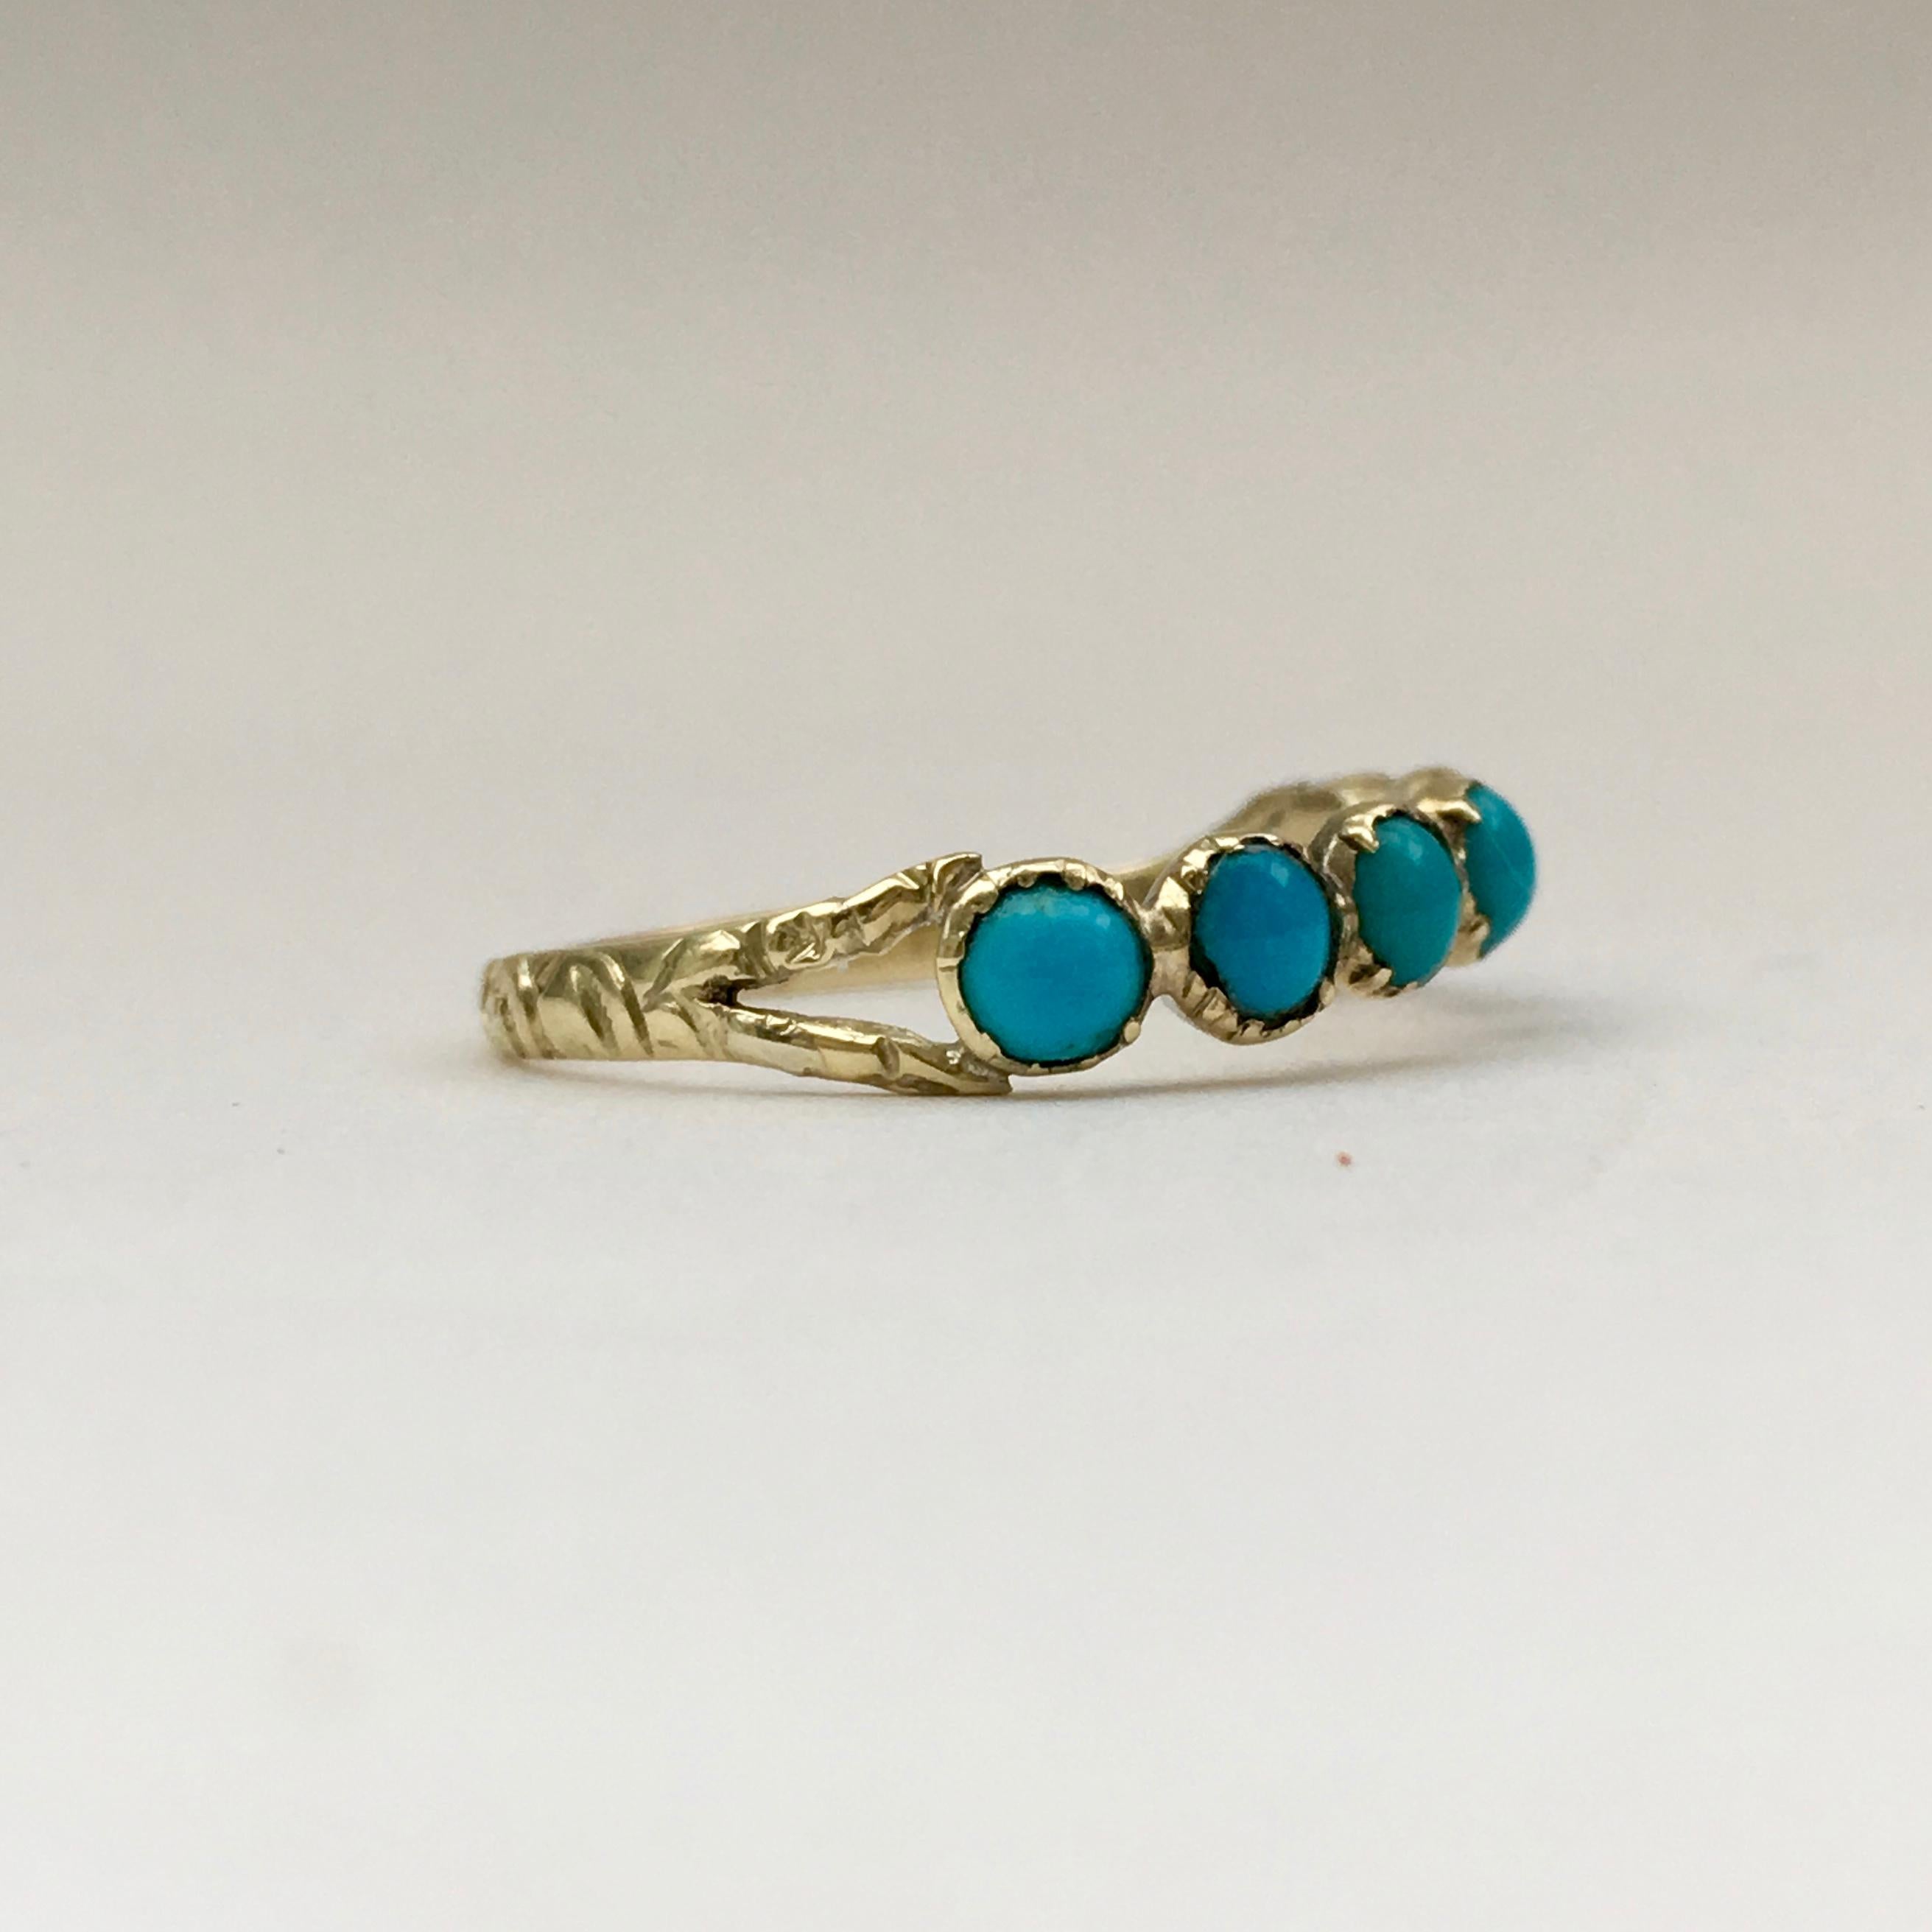 Turquoise is one of the oldest stones and has been used in jewellery throughout history. This delicate half eternity band ring is a lovely example that dates from the Georgian era. The split shank is engraved with a foliate design, and the collet